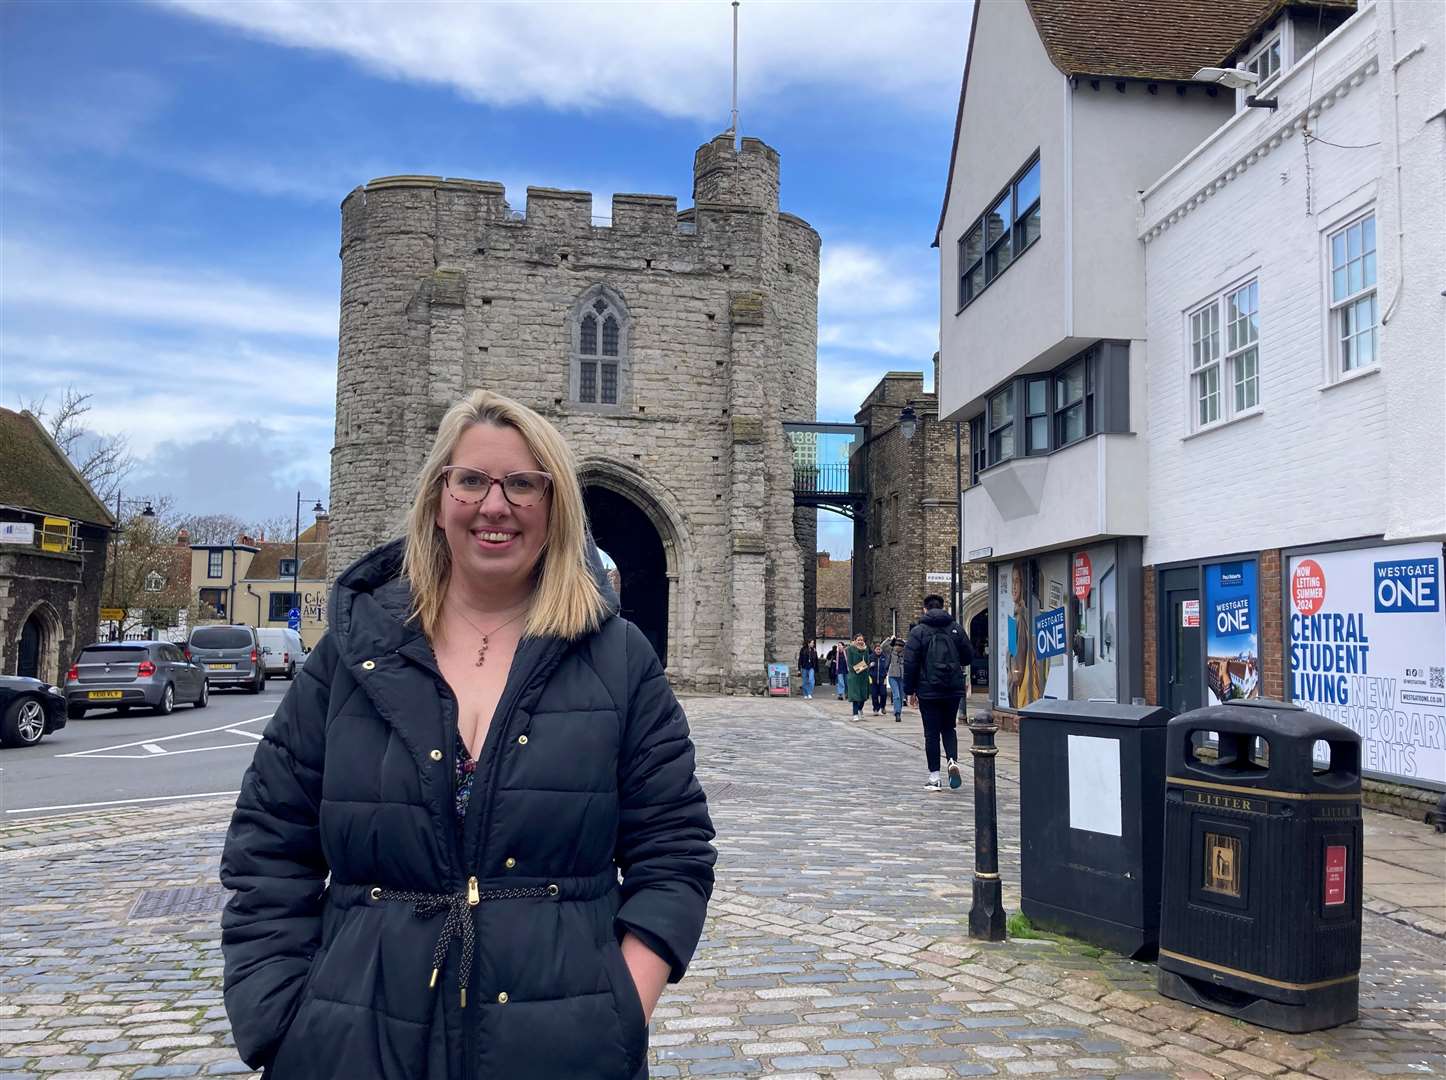 Cllr Charlotte Cornell says the Westgate medieval gatehouse will remain open